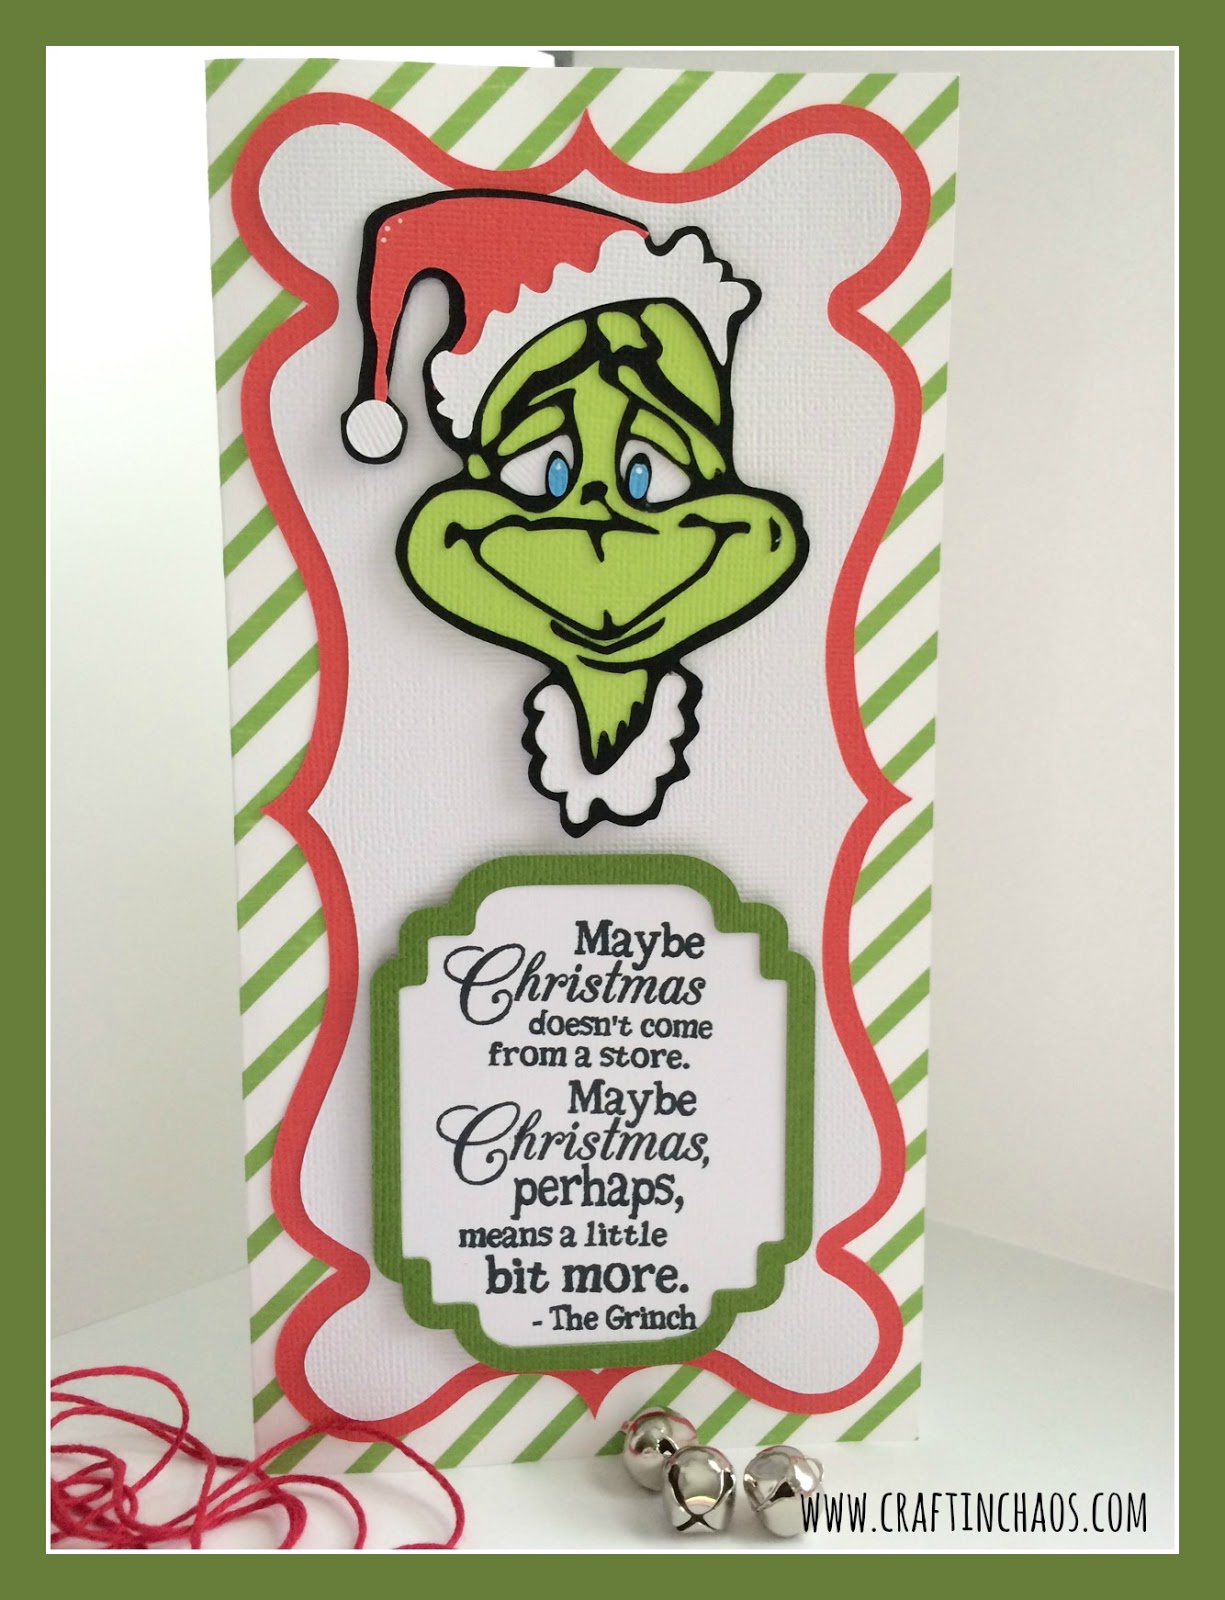 Grinch Face Svg  Search Results  Calendar 2015